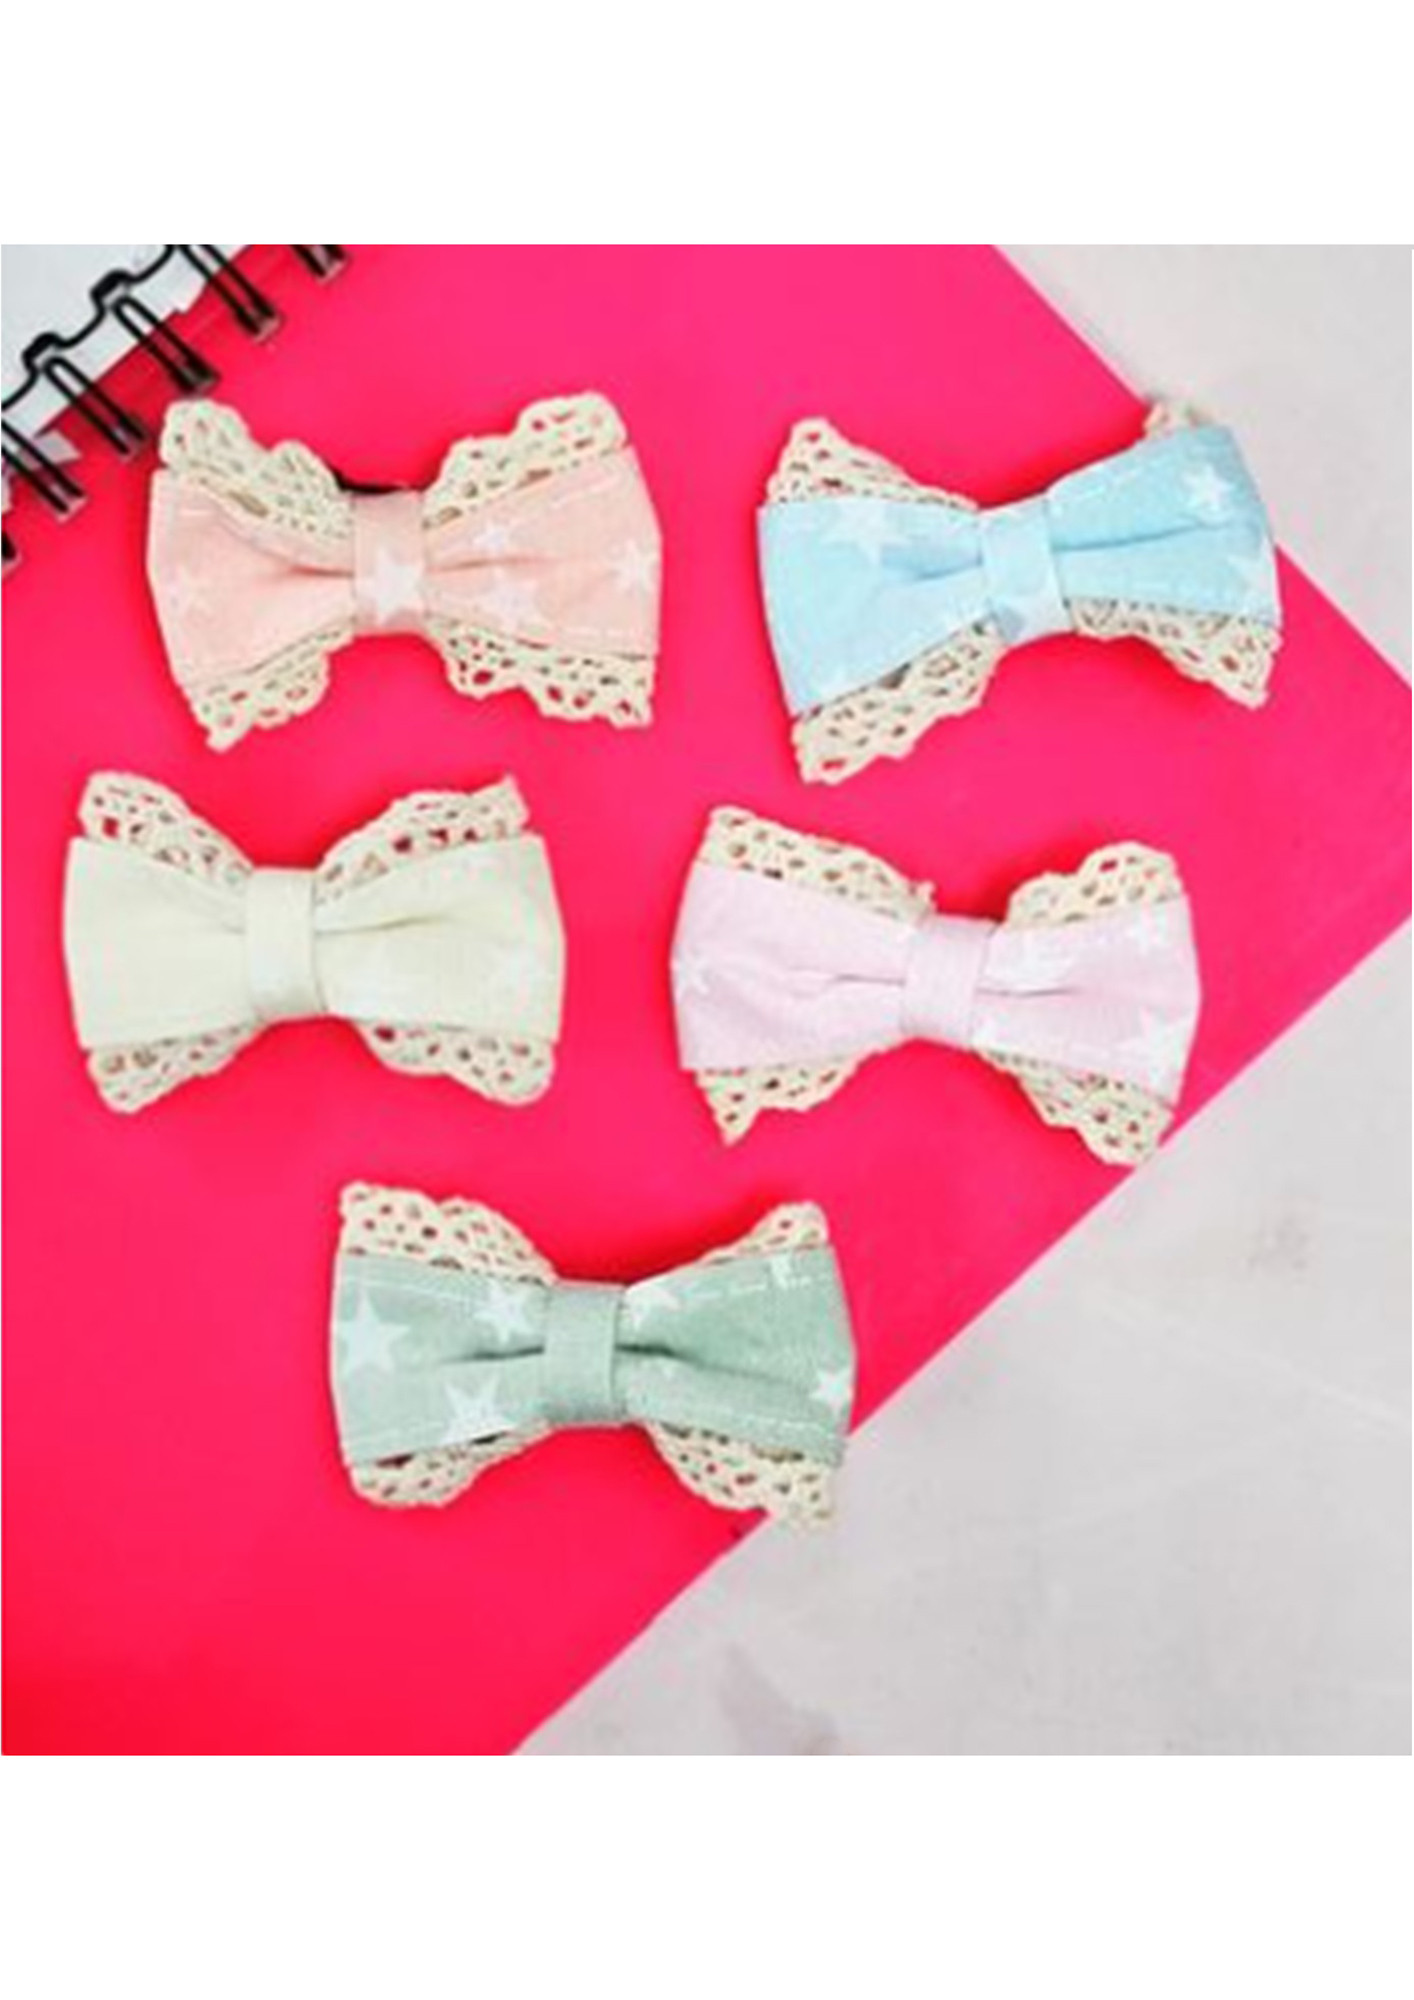 Pretty and Cute Hair Bow Clip Pin Pack of 5 by The Little Girl Store-LG_PrettyBow07